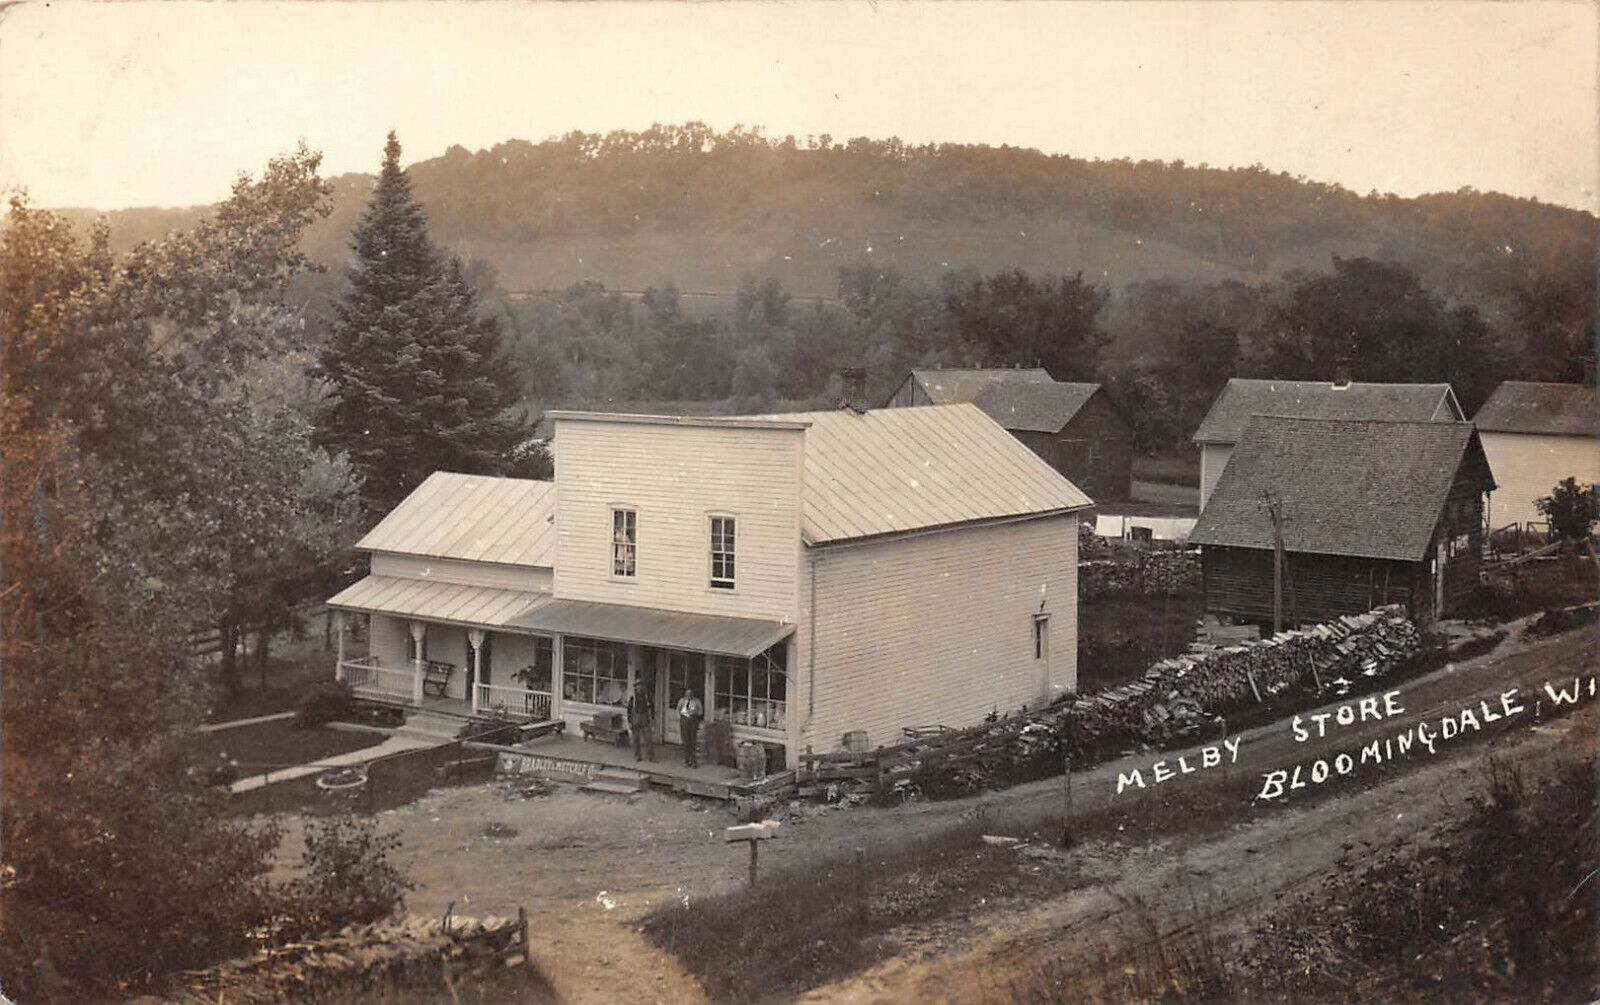 RPPC Melby Store Bloomingdale Wisconsin 1913 Photo Postcard